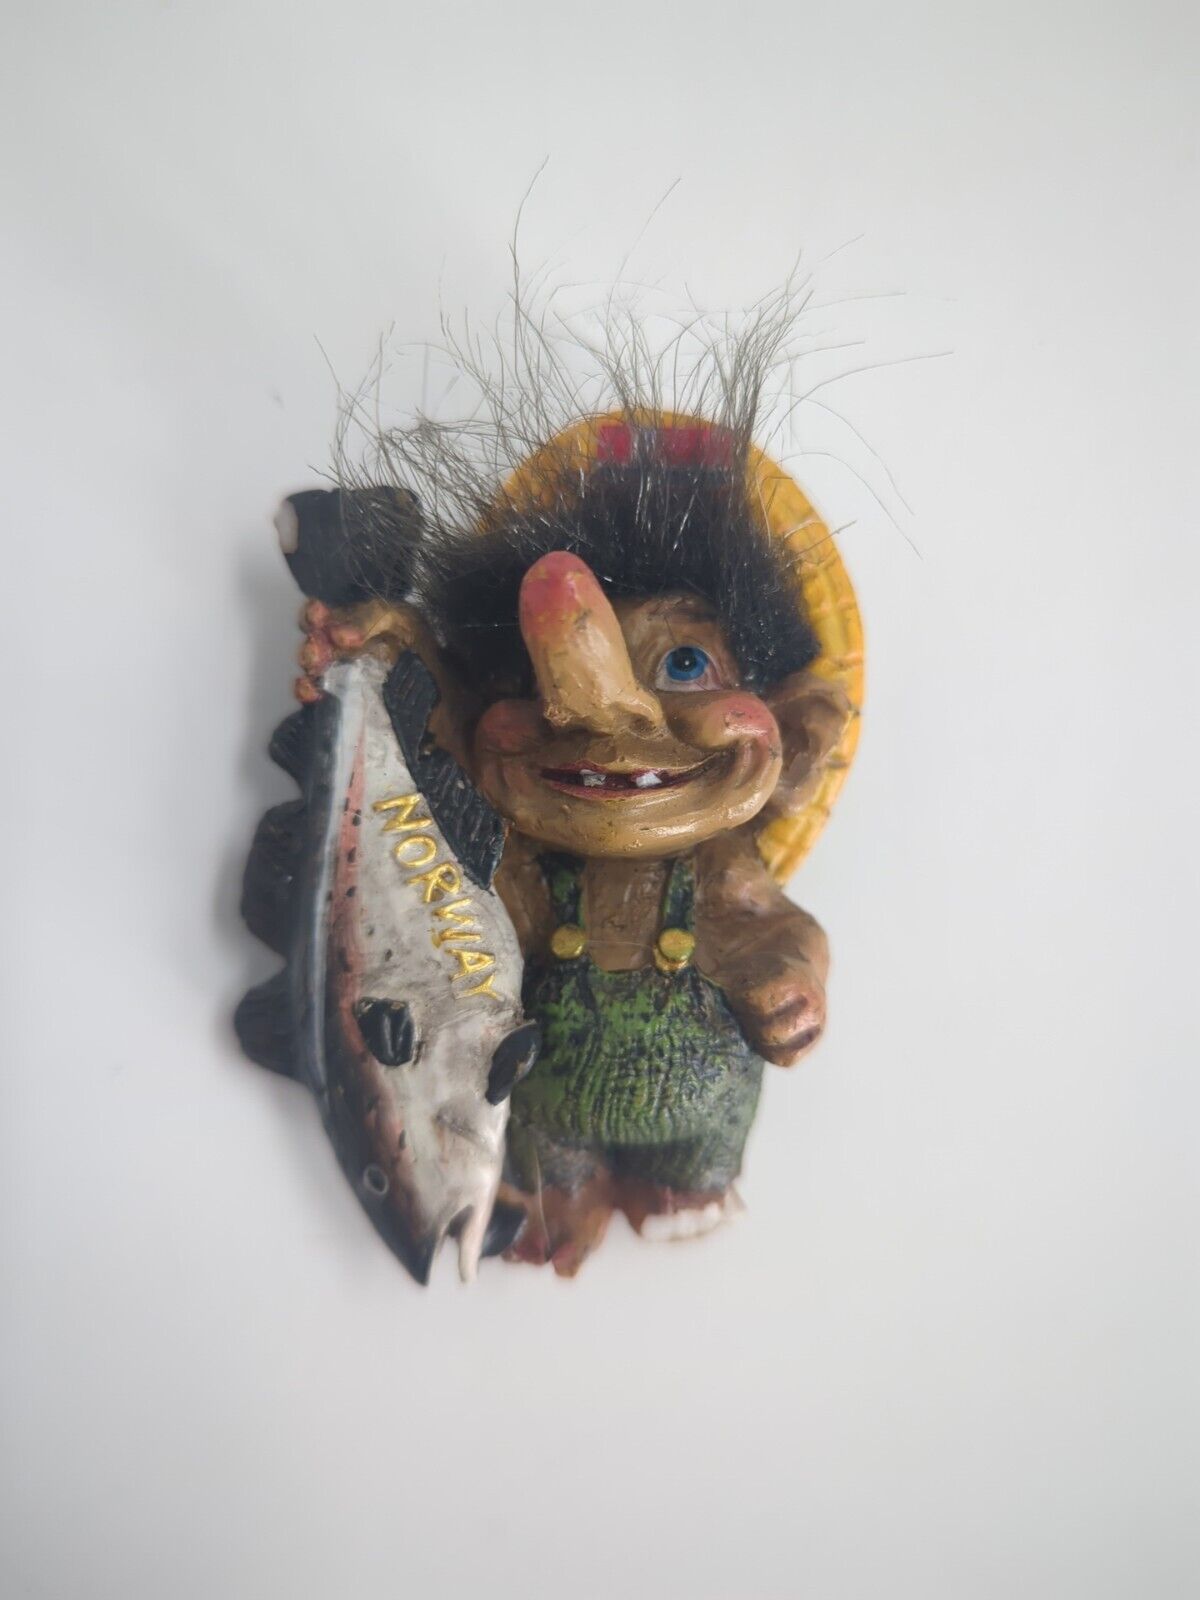 Vintage Nord Souvenir Troll Fisherman Fish Catch of the Day Norway Magnet